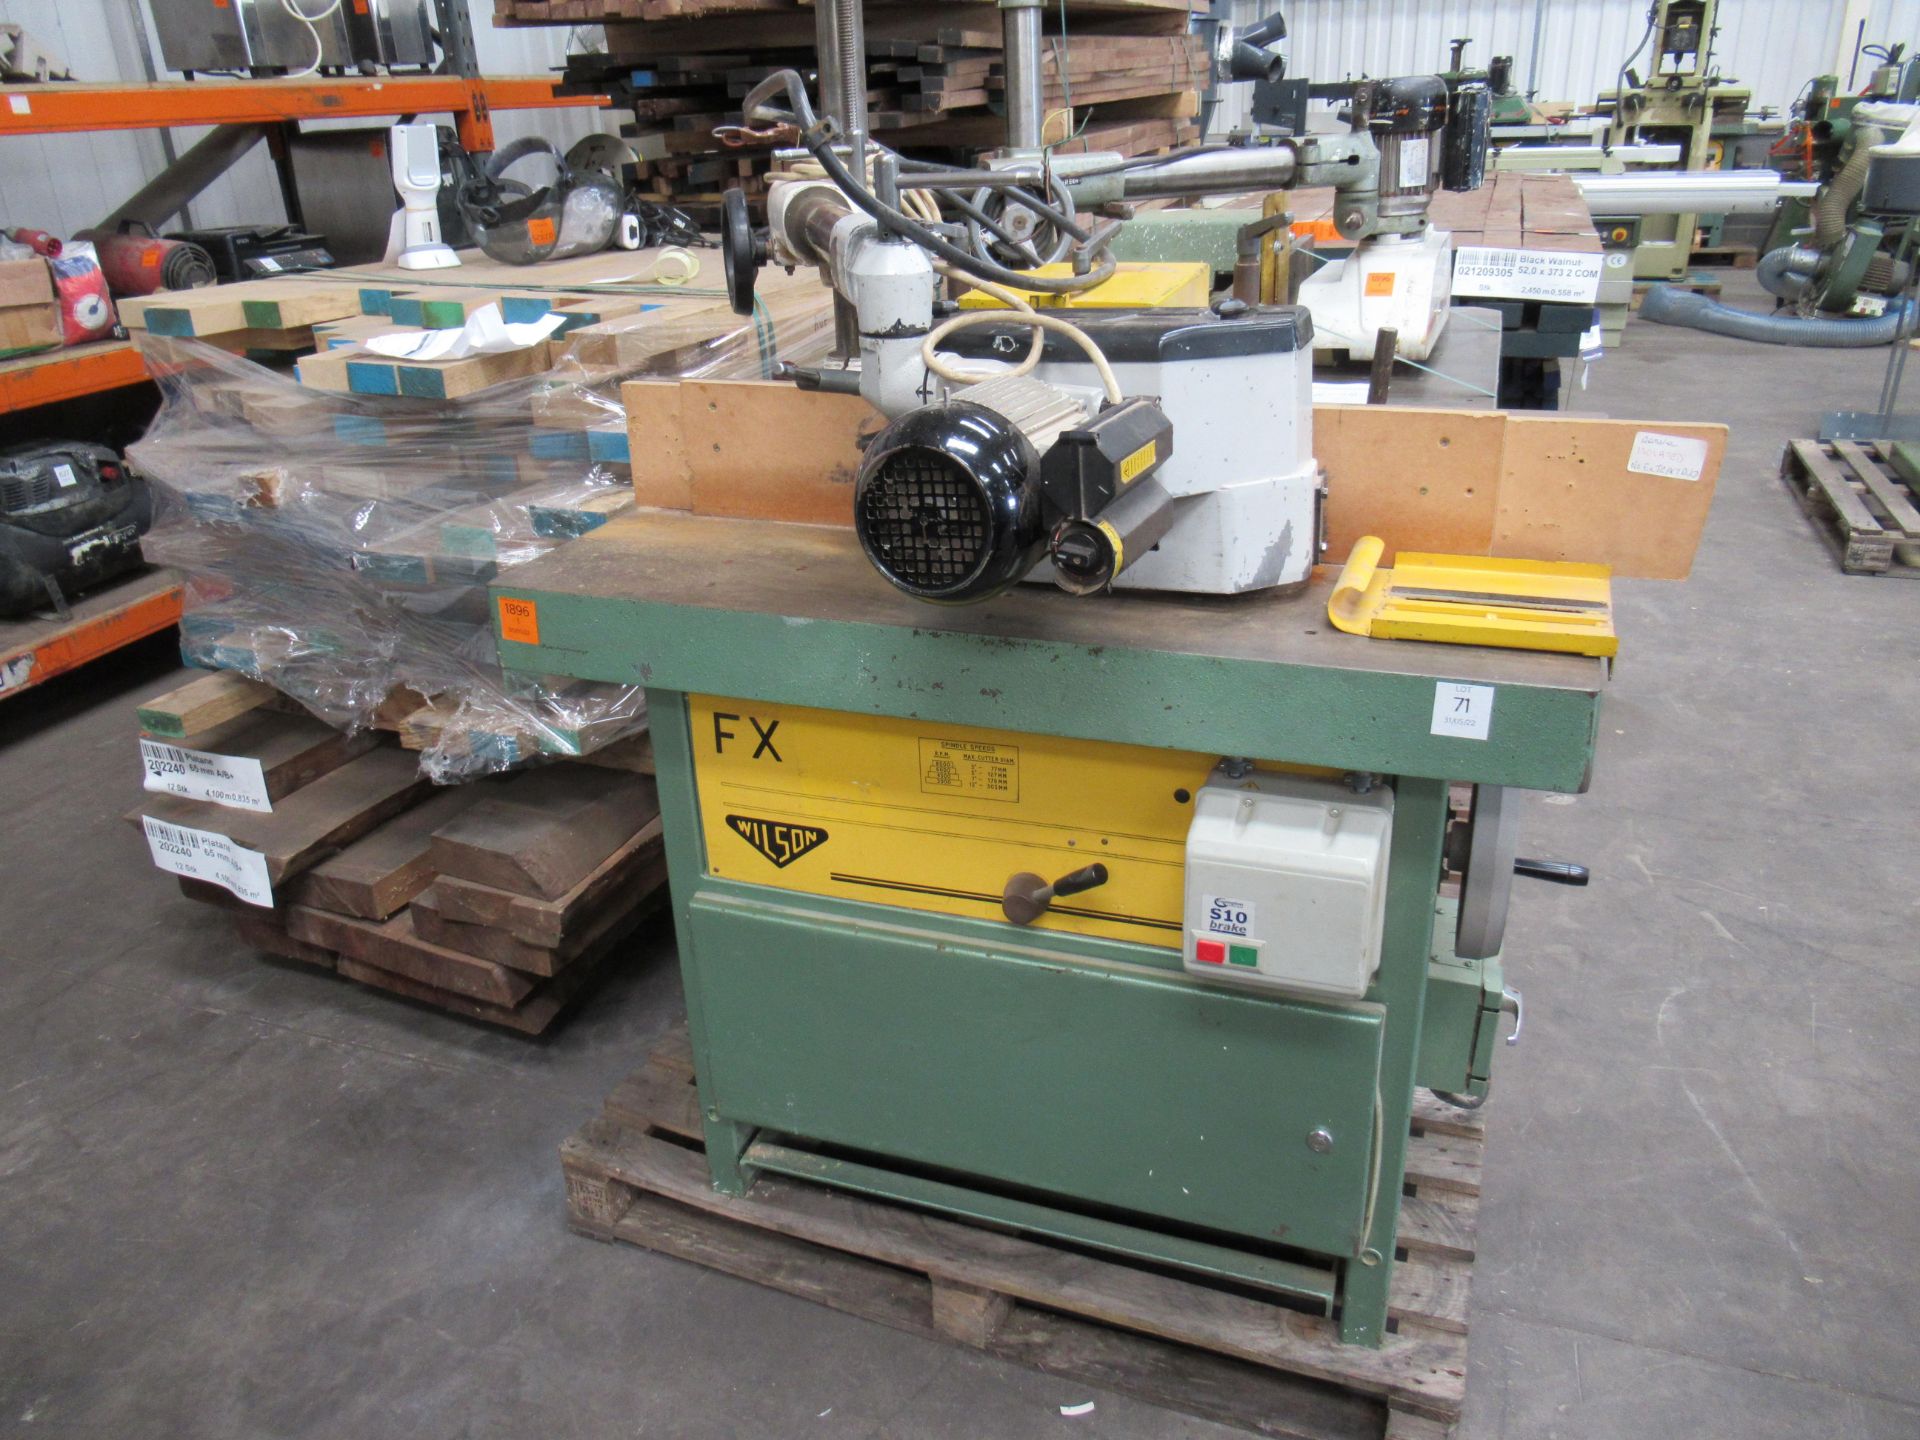 Wilson FX Spindle Moulder with unbranded powered roller feed. Please note there is a £15 plus VAT Li